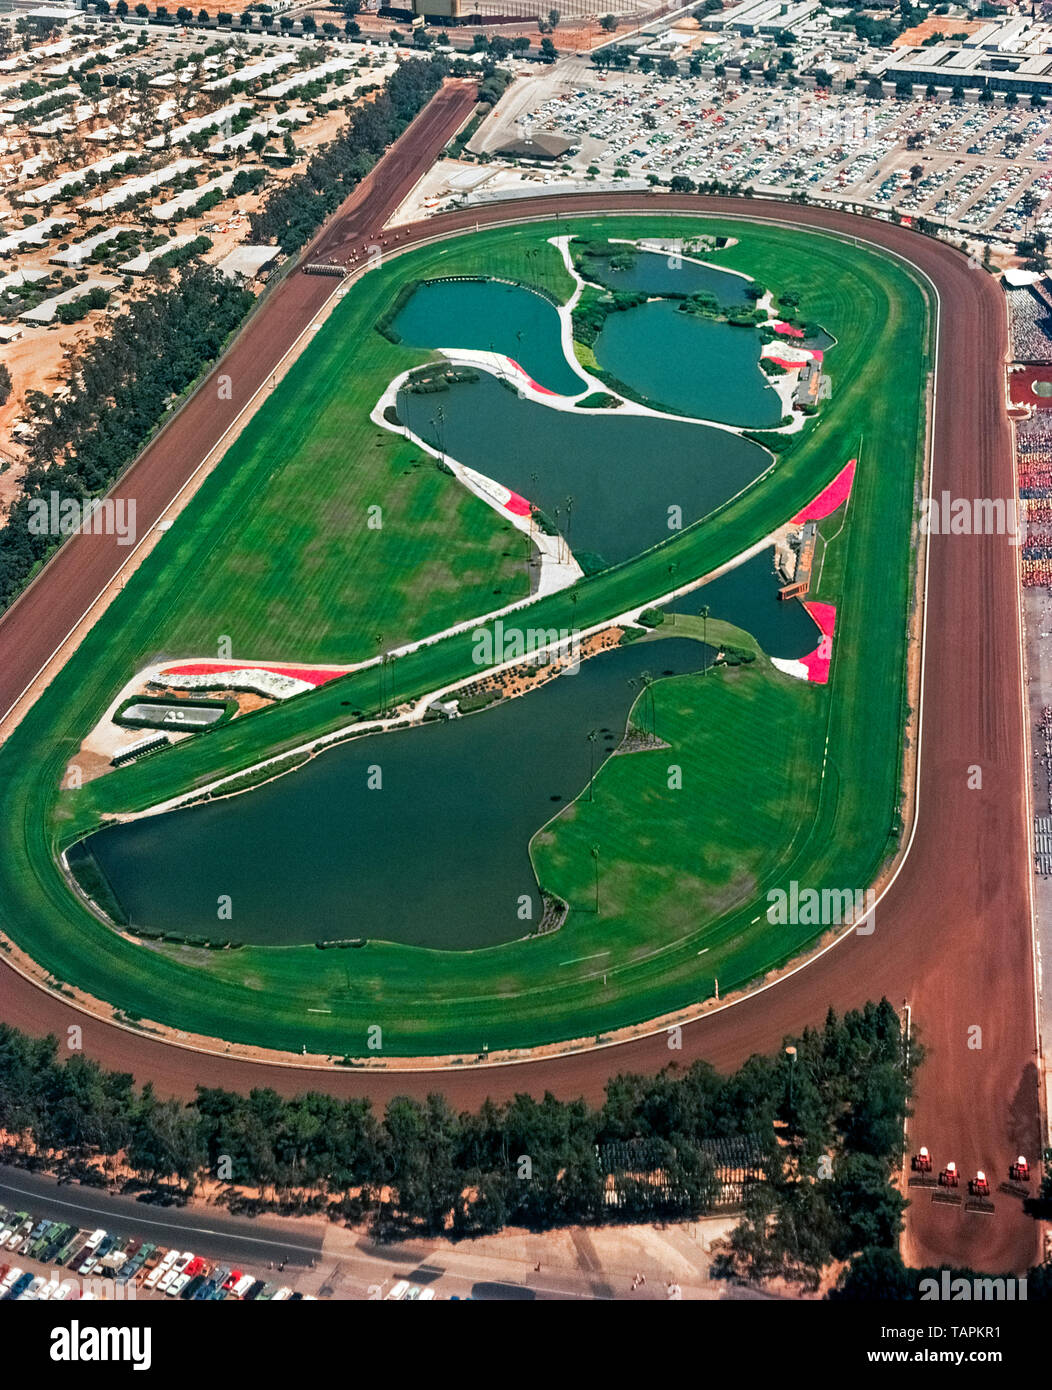 This historical 1974 aerial photograph shows the now-demolished Hollywood Park Racetrack that was famous for 75 years as the place for thoroughbred horse racing in Los Angeles County, California, USA. The track opened in Inglewood in 1938 and closed at the end of the 2013 race season. The 298-acre (121-hectare) site is being transformed into a residential, entertainment and sports center that features the new 70,000-seat Los Angeles Stadium. Home games of two National Football League (NFL) teams, Los Angeles Chargers and Los Angeles Rams, will be played there, as will the Super Bowl in 2022. Stock Photo